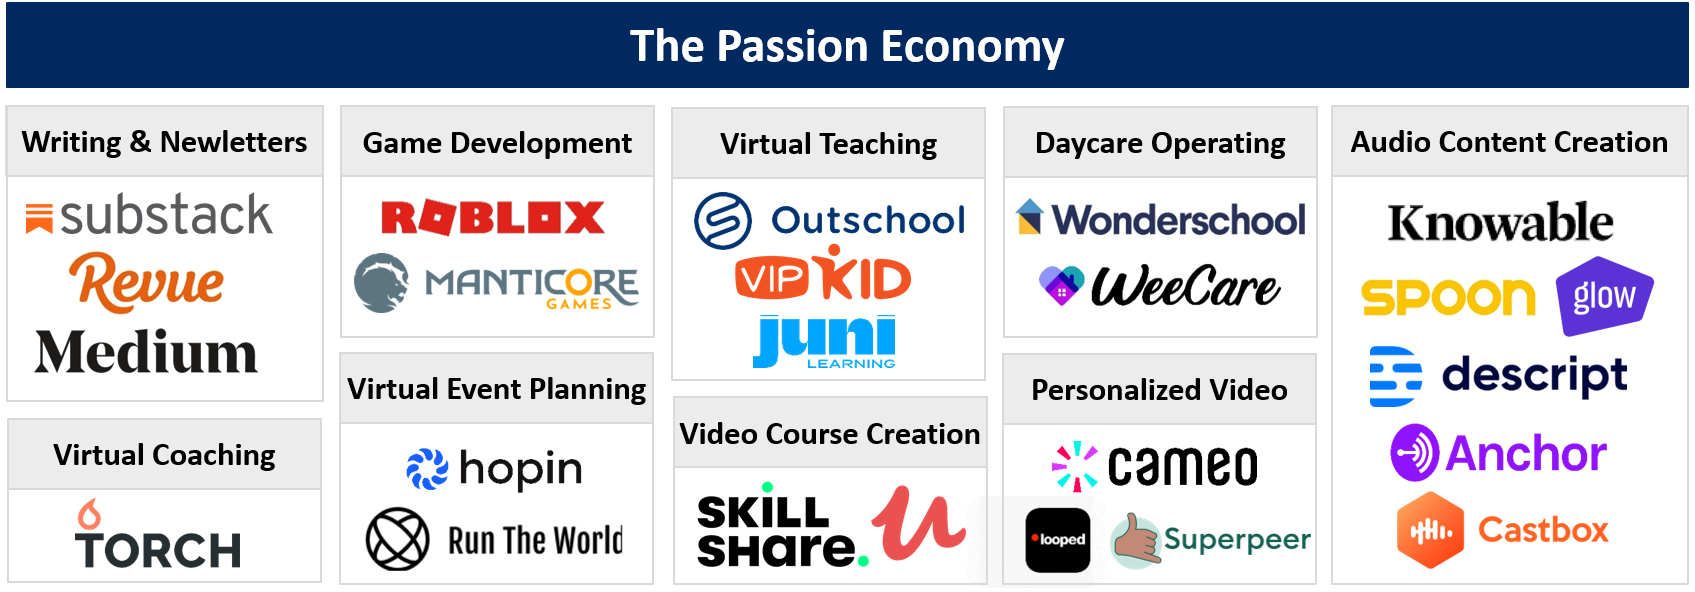 The Passion Economy Is Reinventing Careers - rex cash robux get free robux for watching ads